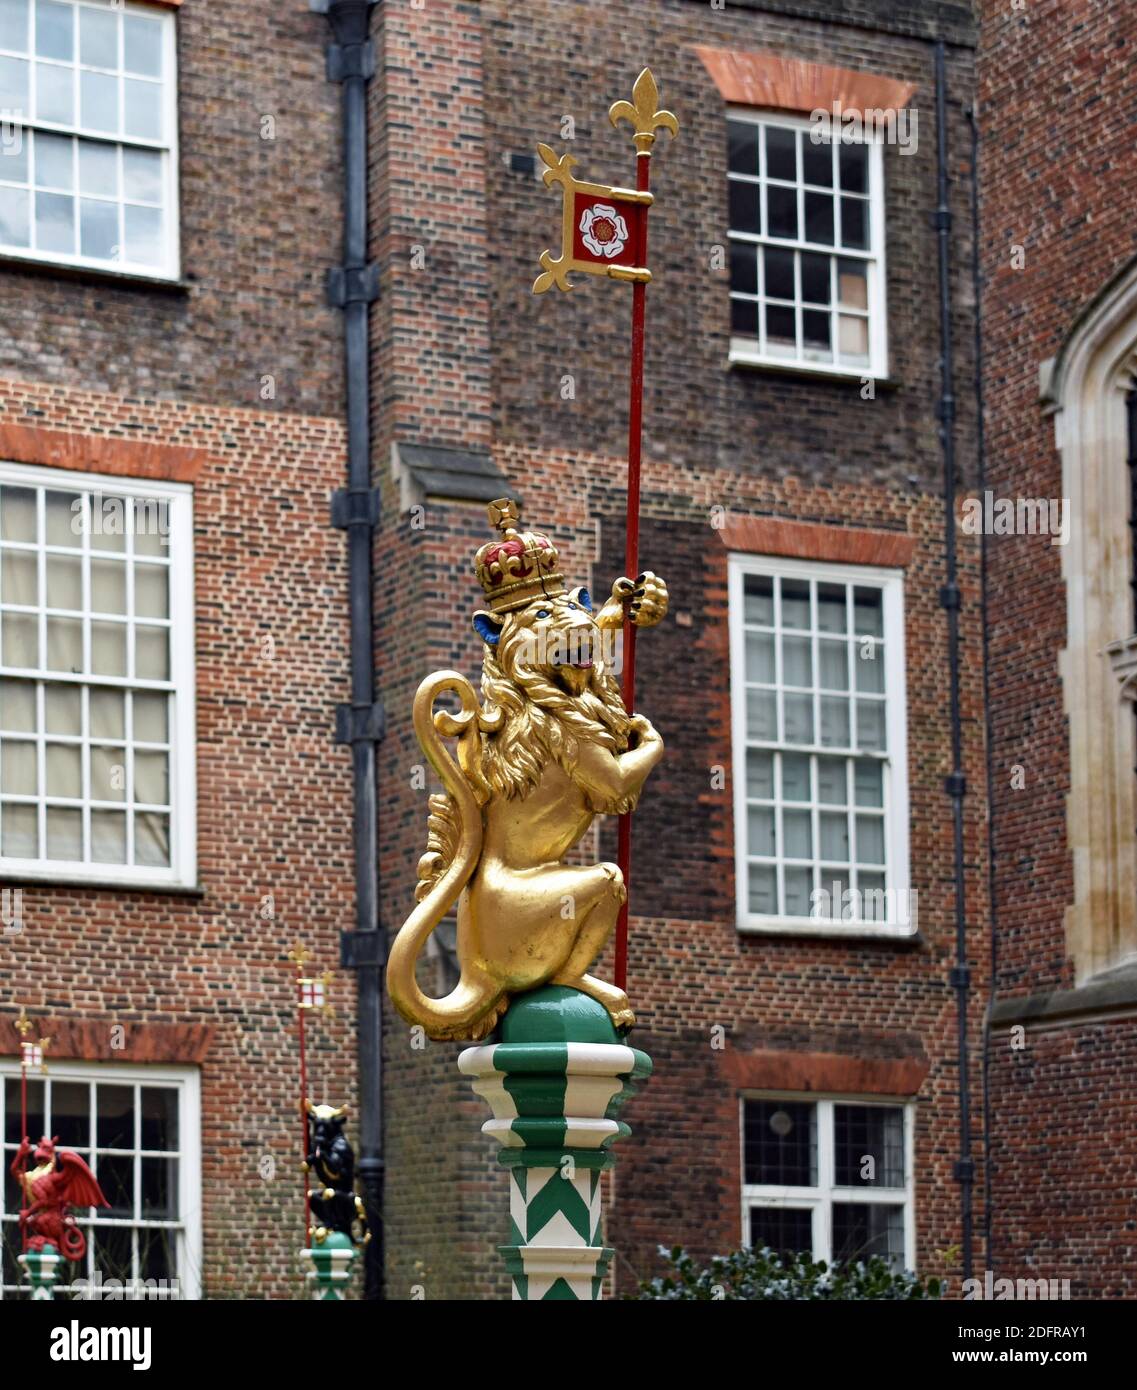 The Chapel Court garden at Hampton Court Palace, London. A golden beast carved in English Oak to a Tudor design stands atop of a green and white pole Stock Photo